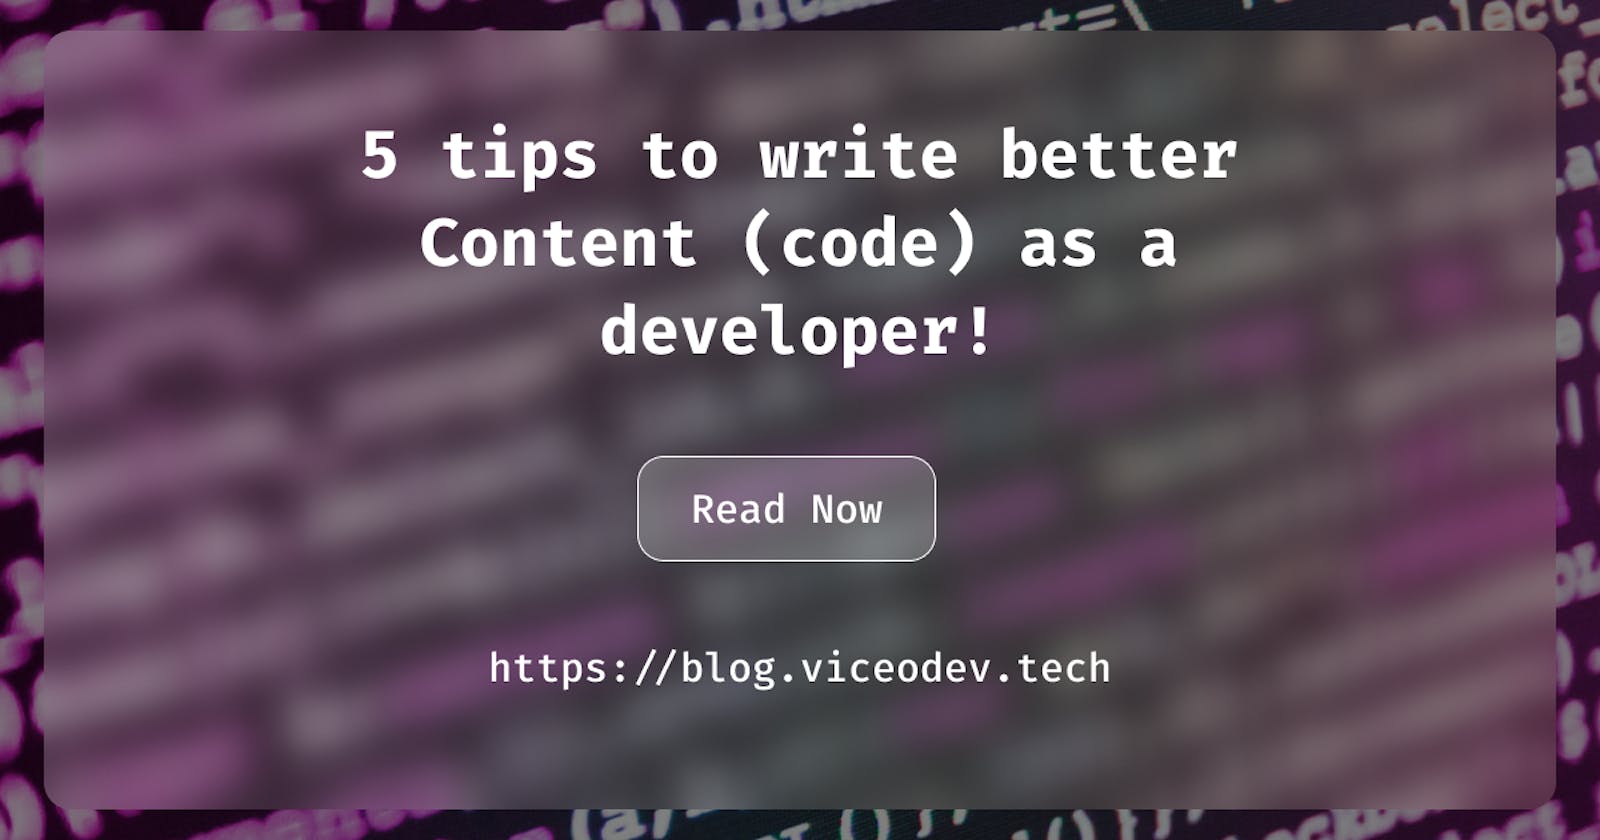 5 tips to write better Content (code) as a developer!